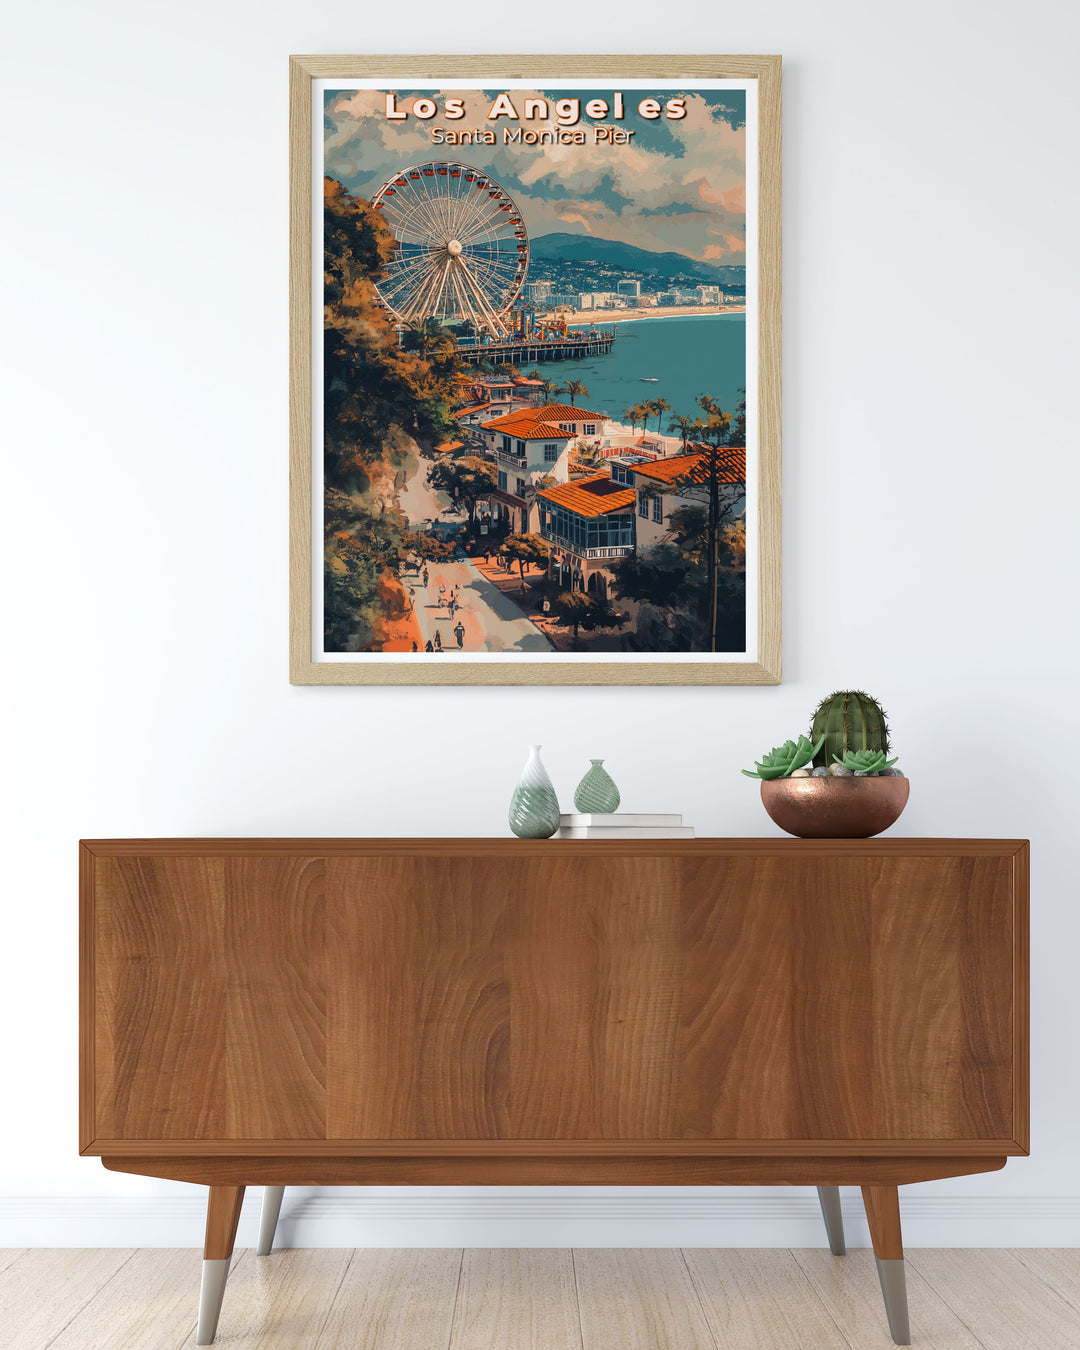 Featuring the charming Santa Monica Pier, this poster showcases the iconic Ferris wheel and vibrant boardwalk, ideal for those who love beachside attractions and coastal views.